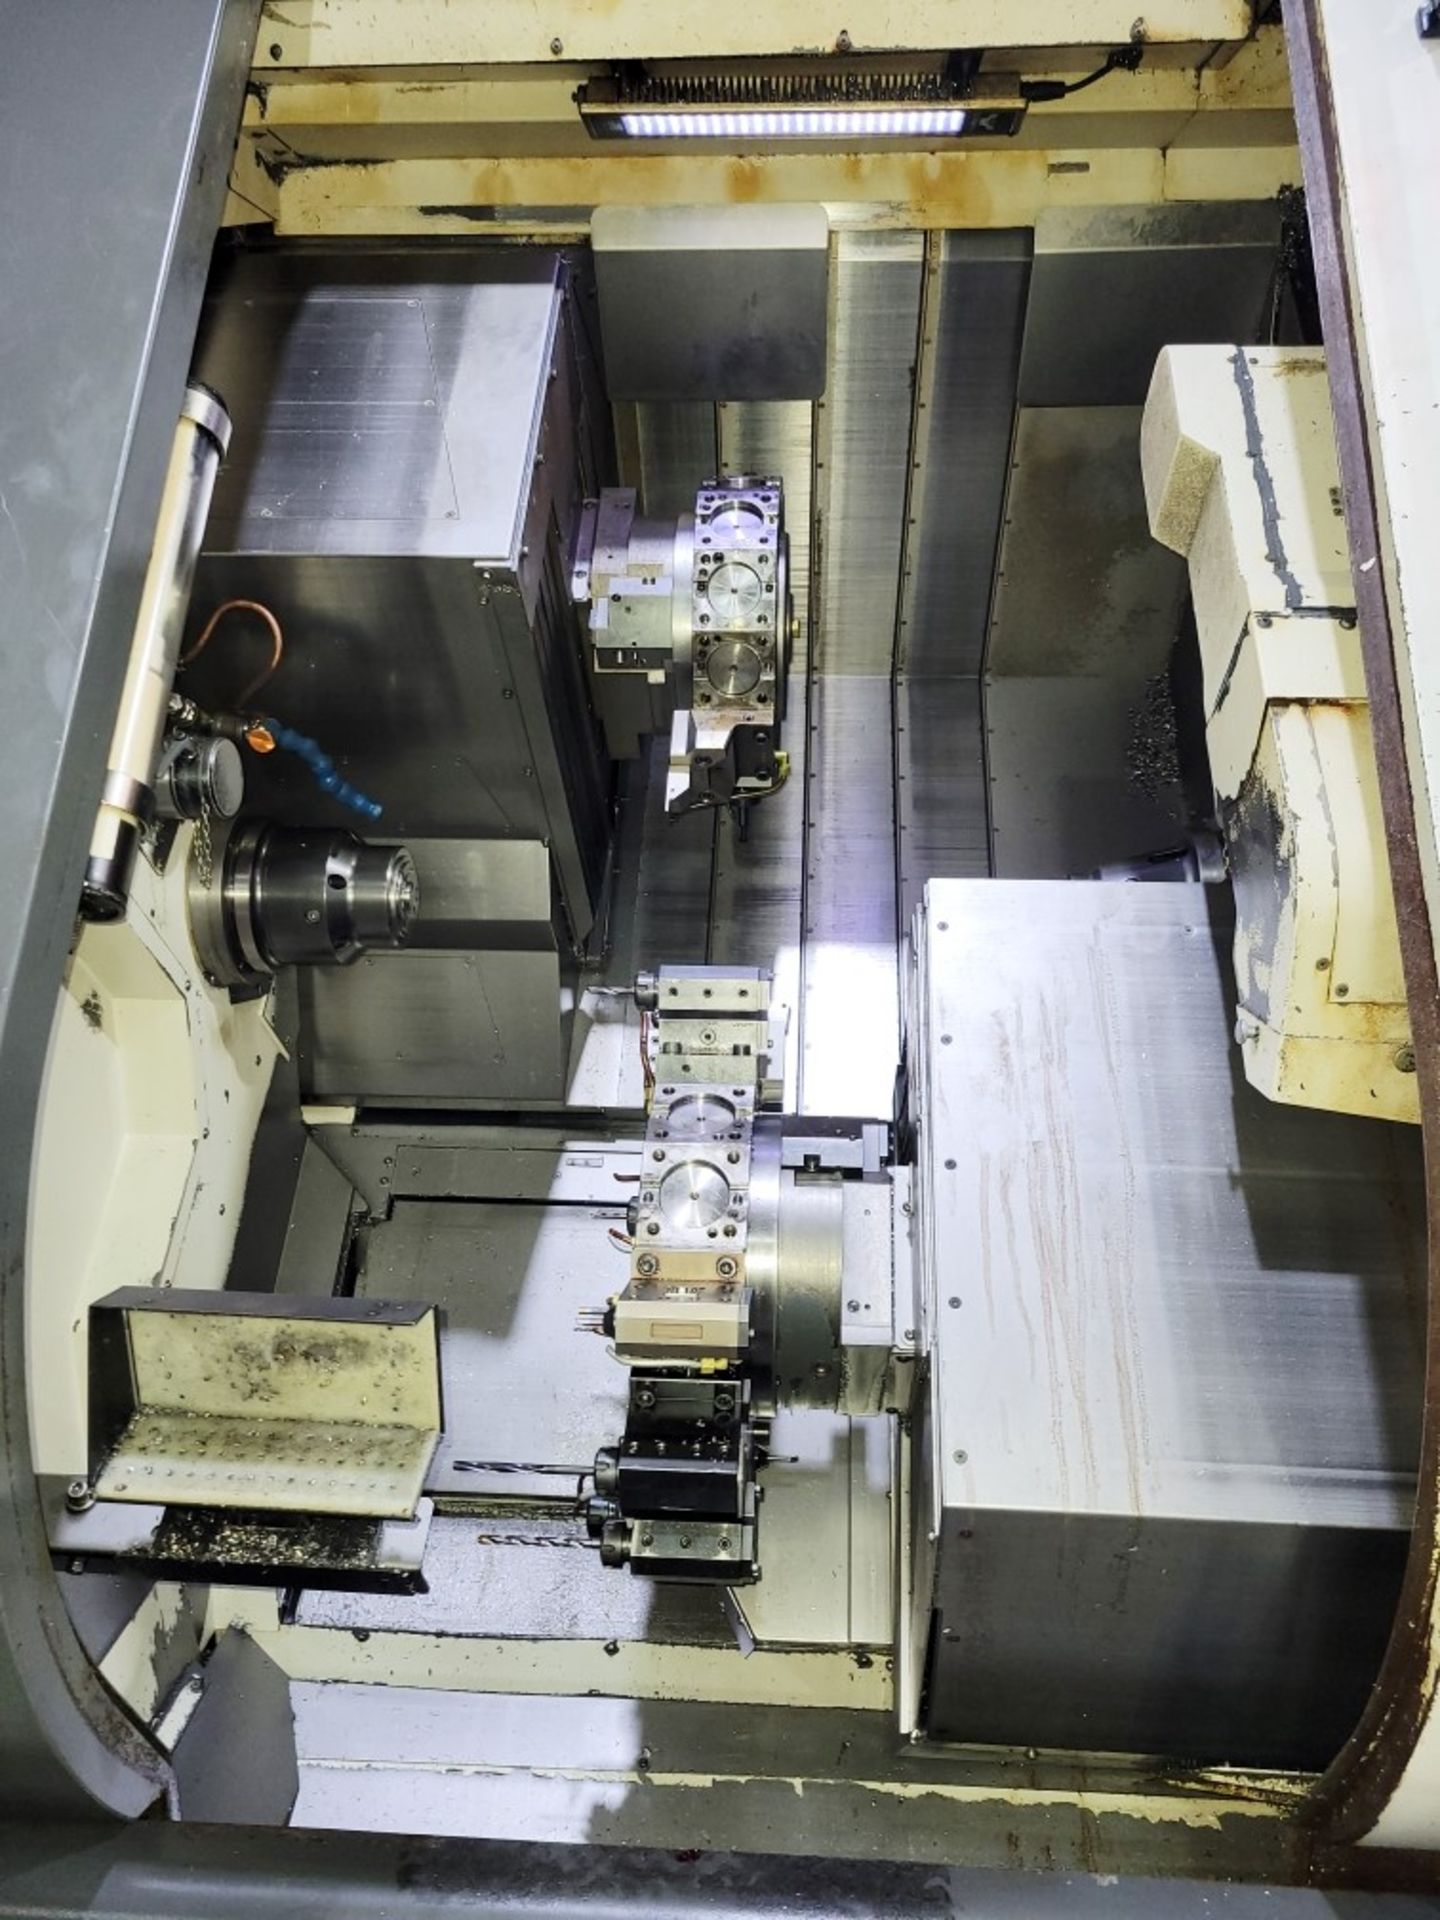 2011 Nakamura Tome WT-300 8-Axis CNC Turning/Milling Center, S/N M302803 - Image 7 of 18